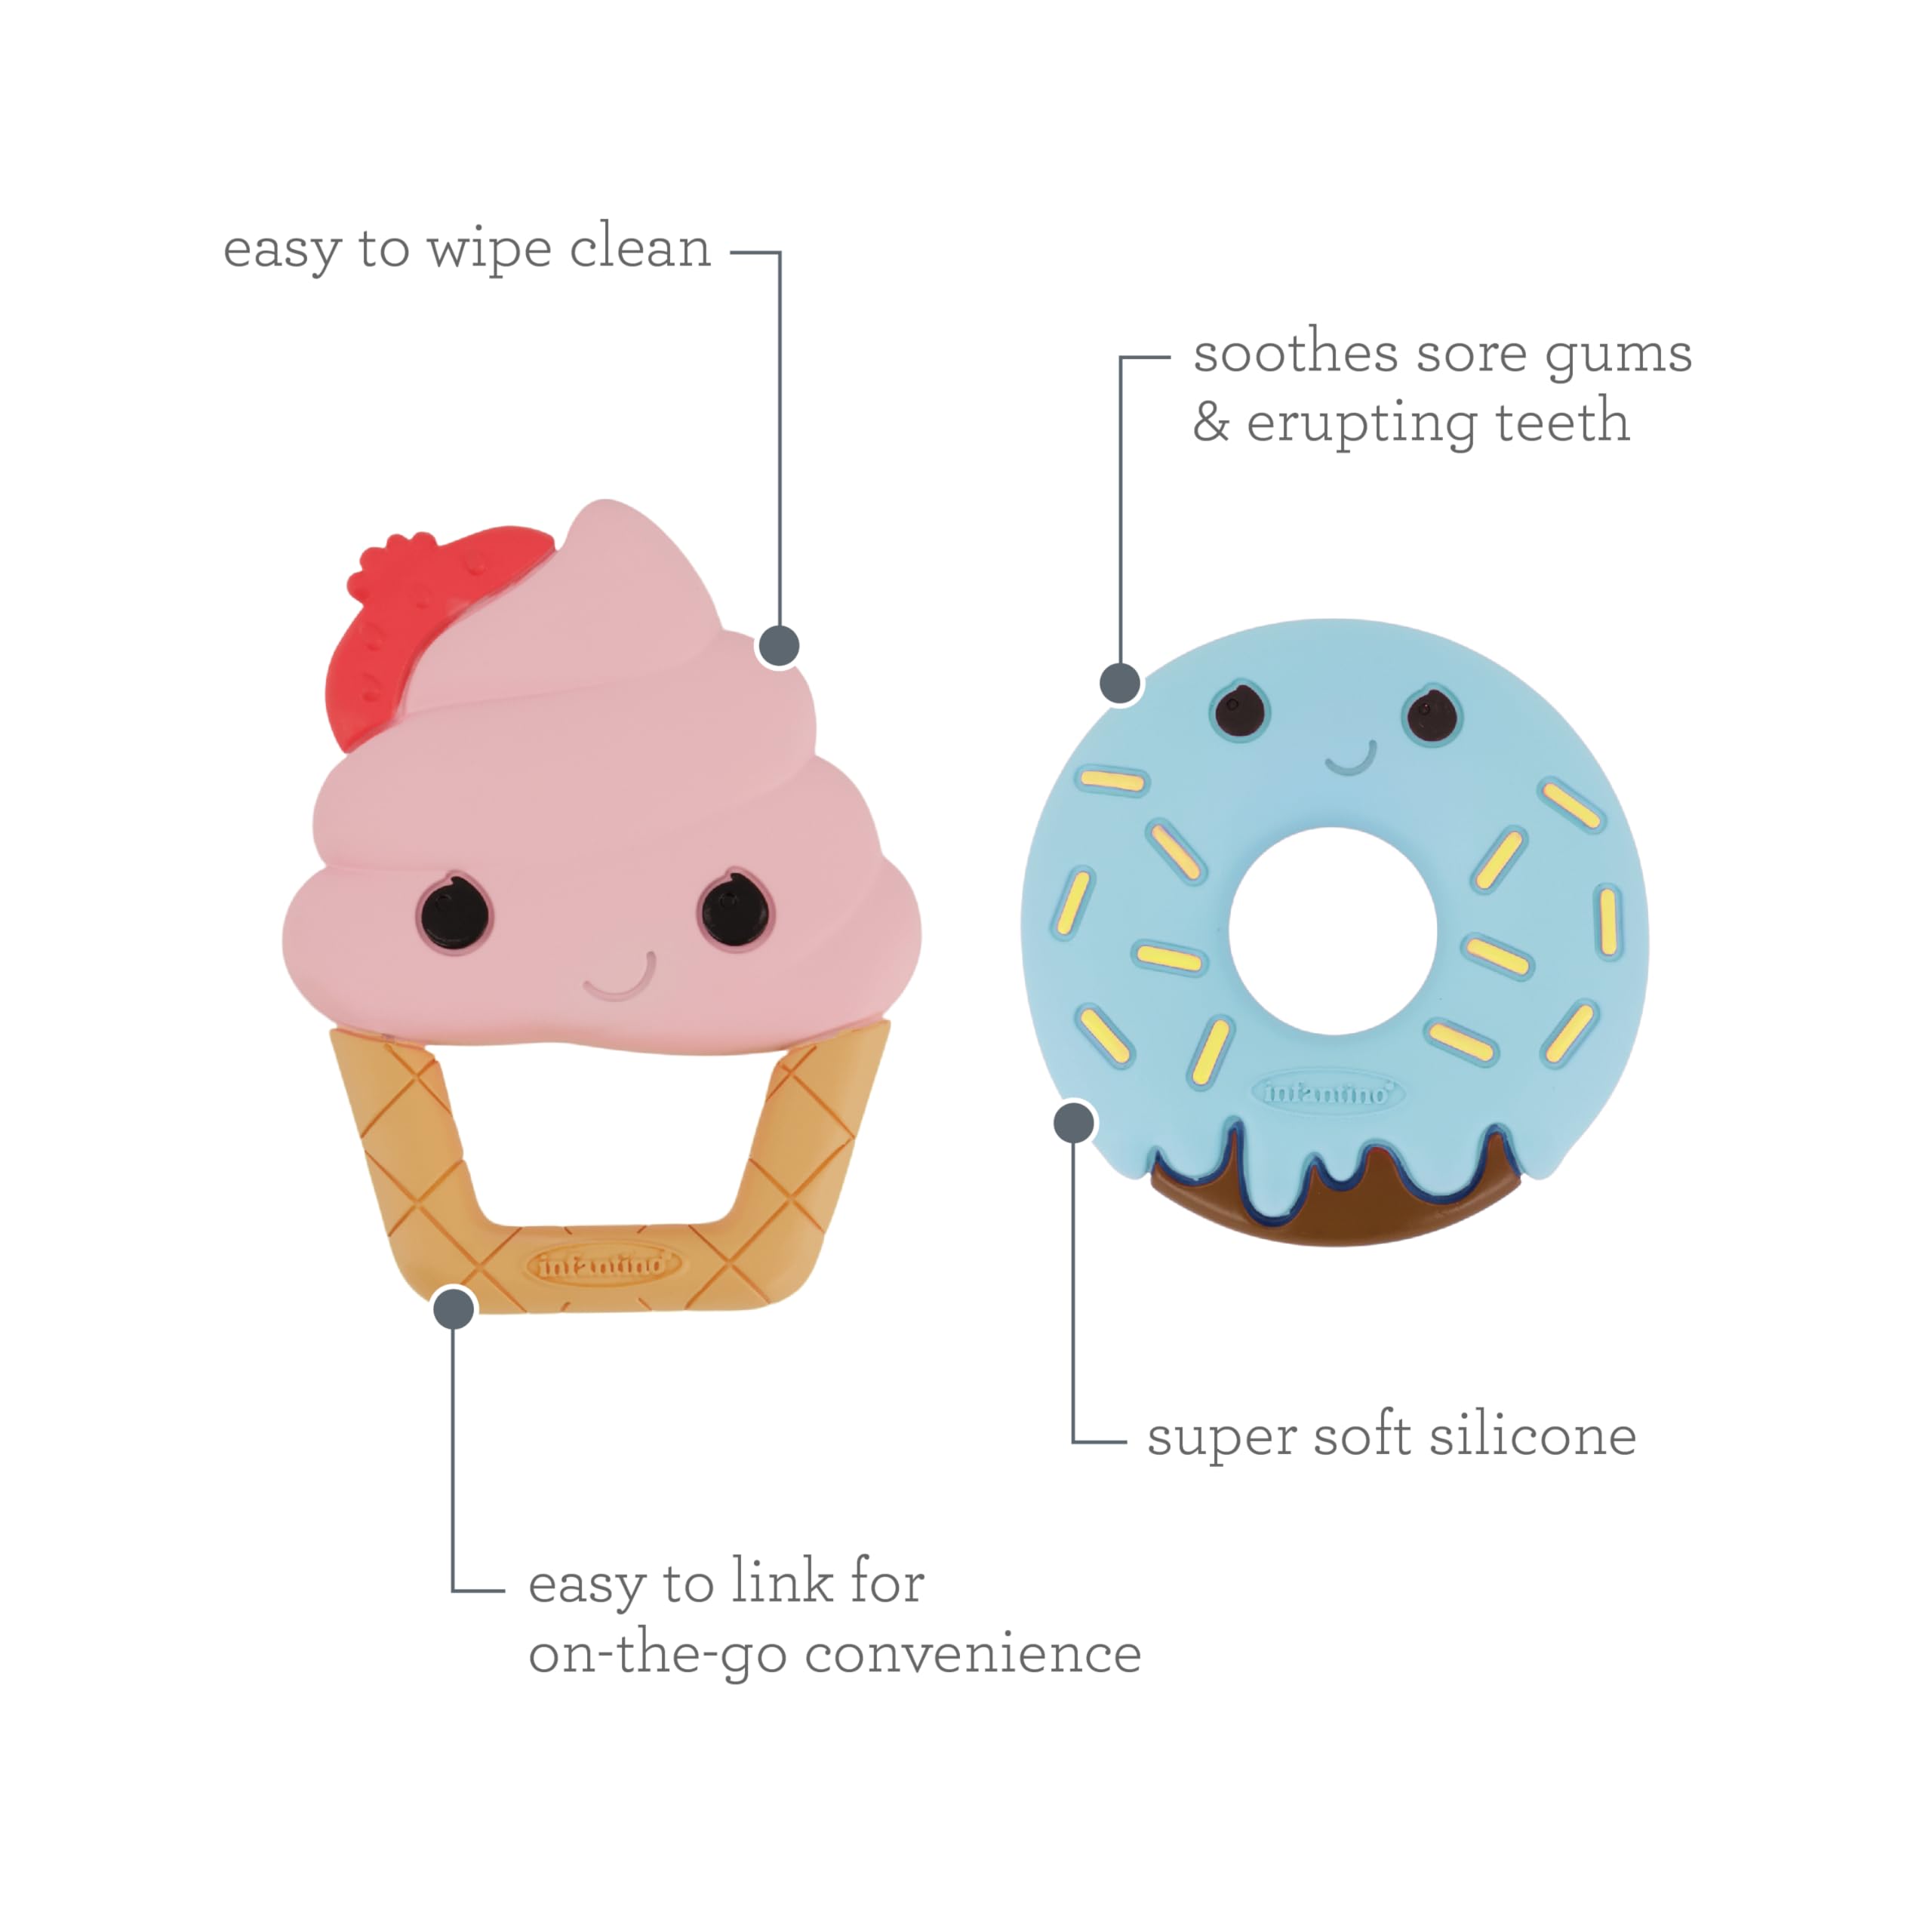 Infantino Sweet Tooth Silicone Teethers, Textured Ice Cream and Donut, 2-Pack